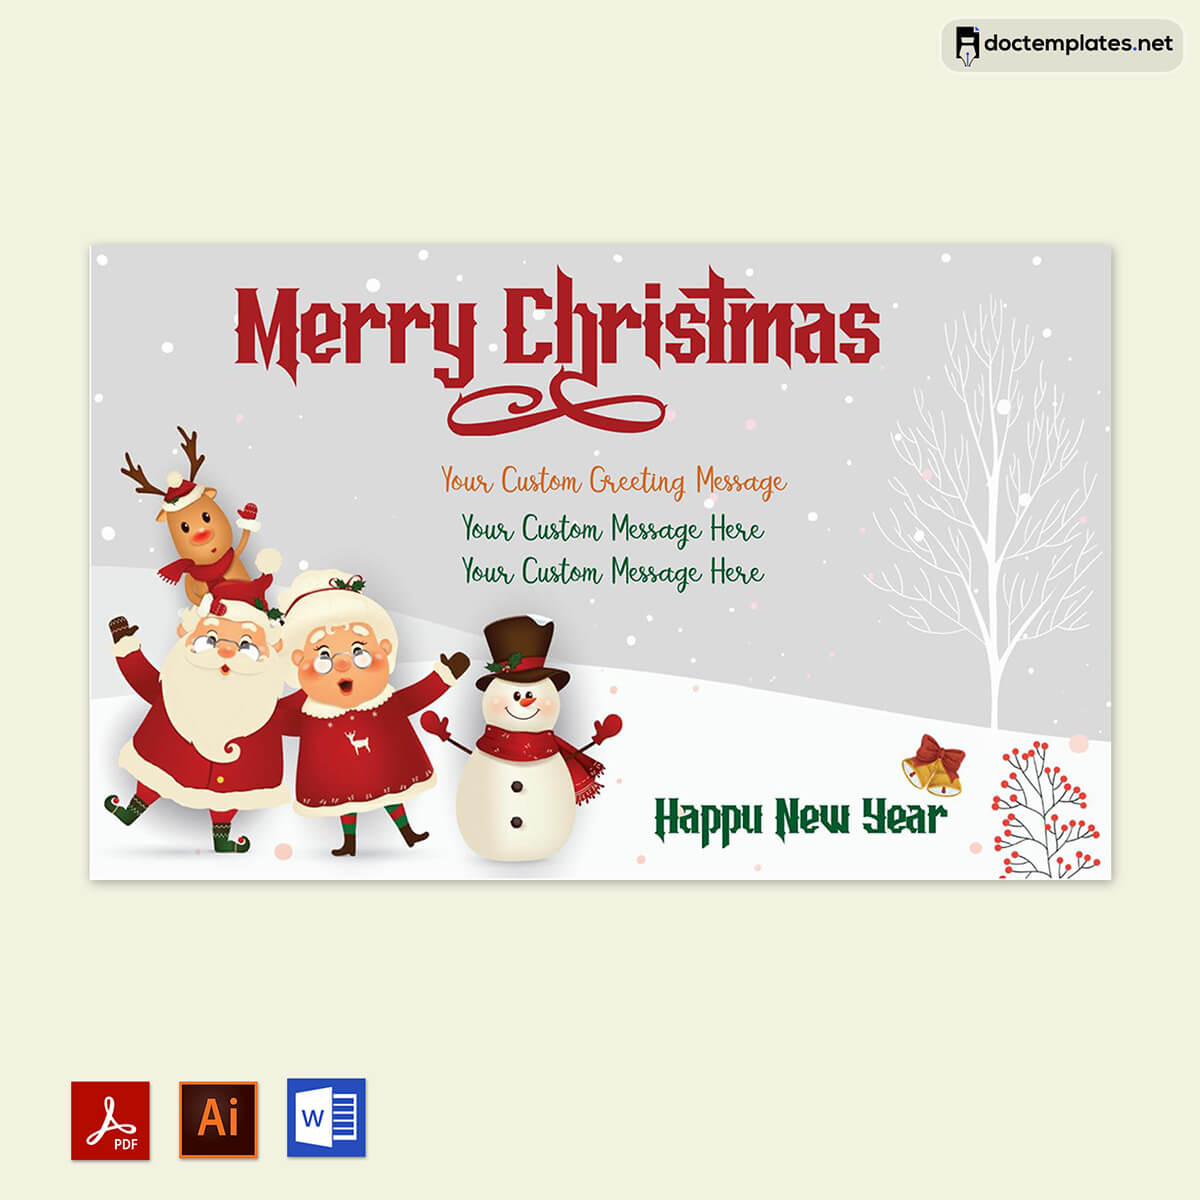 Image of Christmas certificate template free download
Christmas certificate template free download
